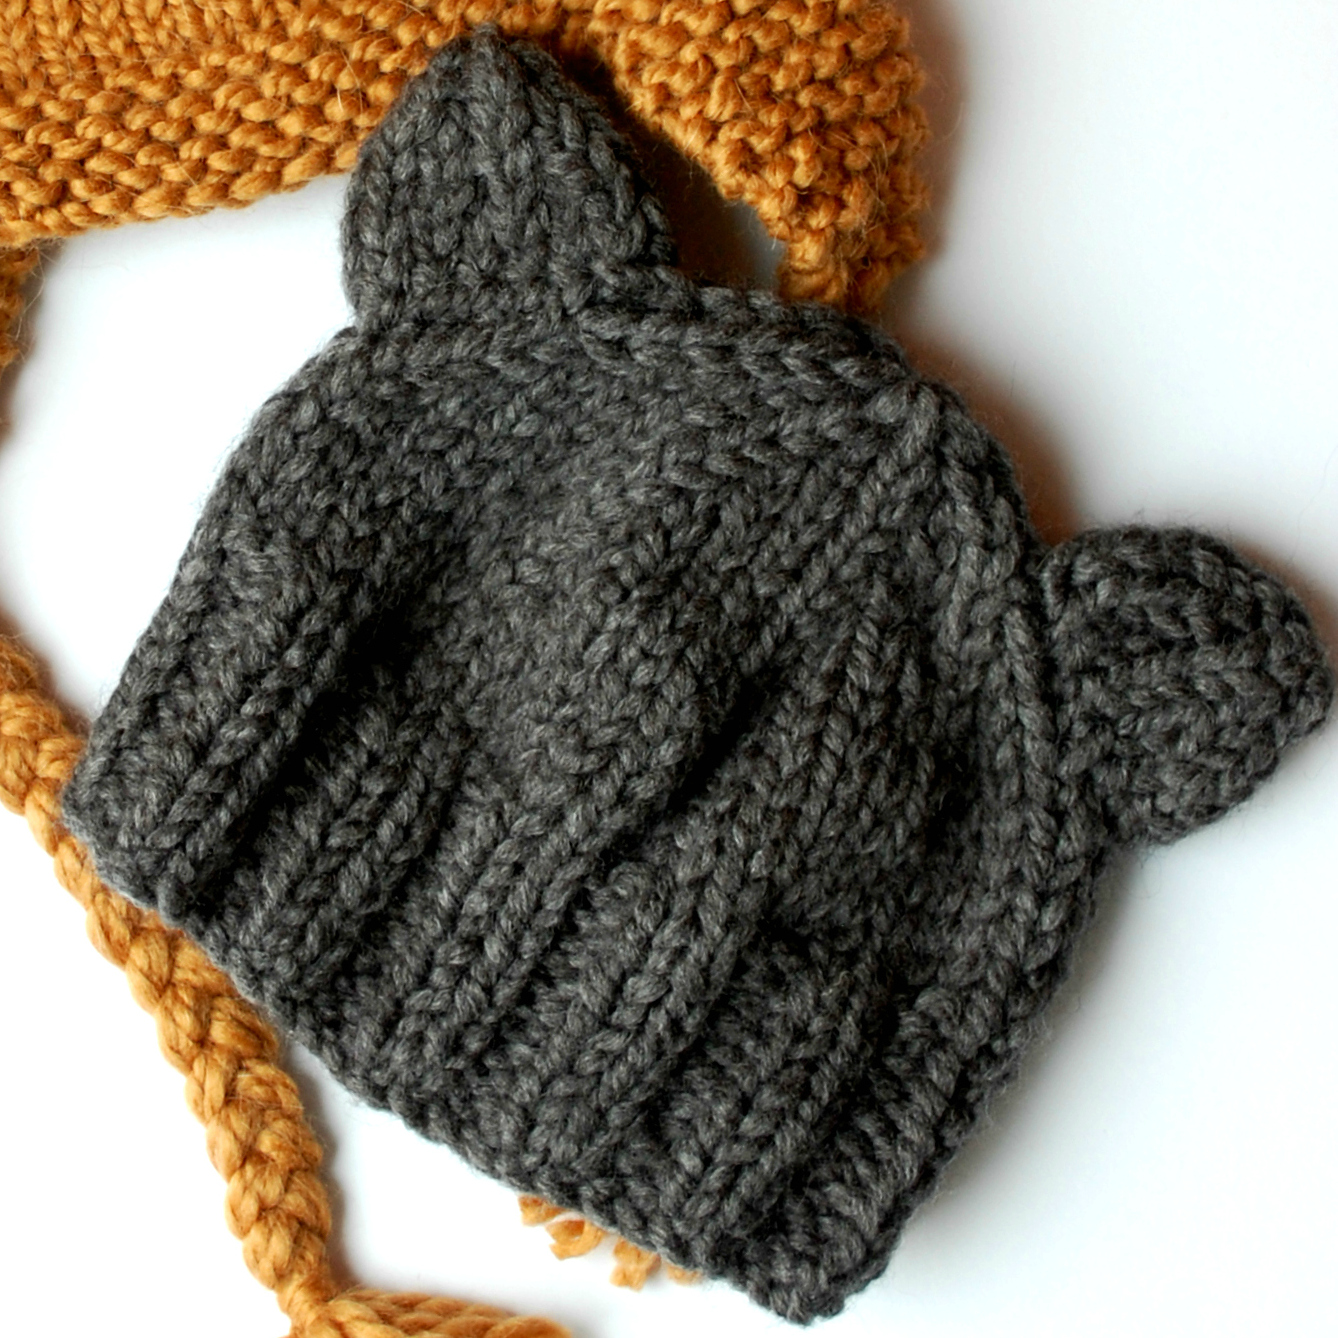 the geeky knitter: free knitting patterns - teddy bear hats